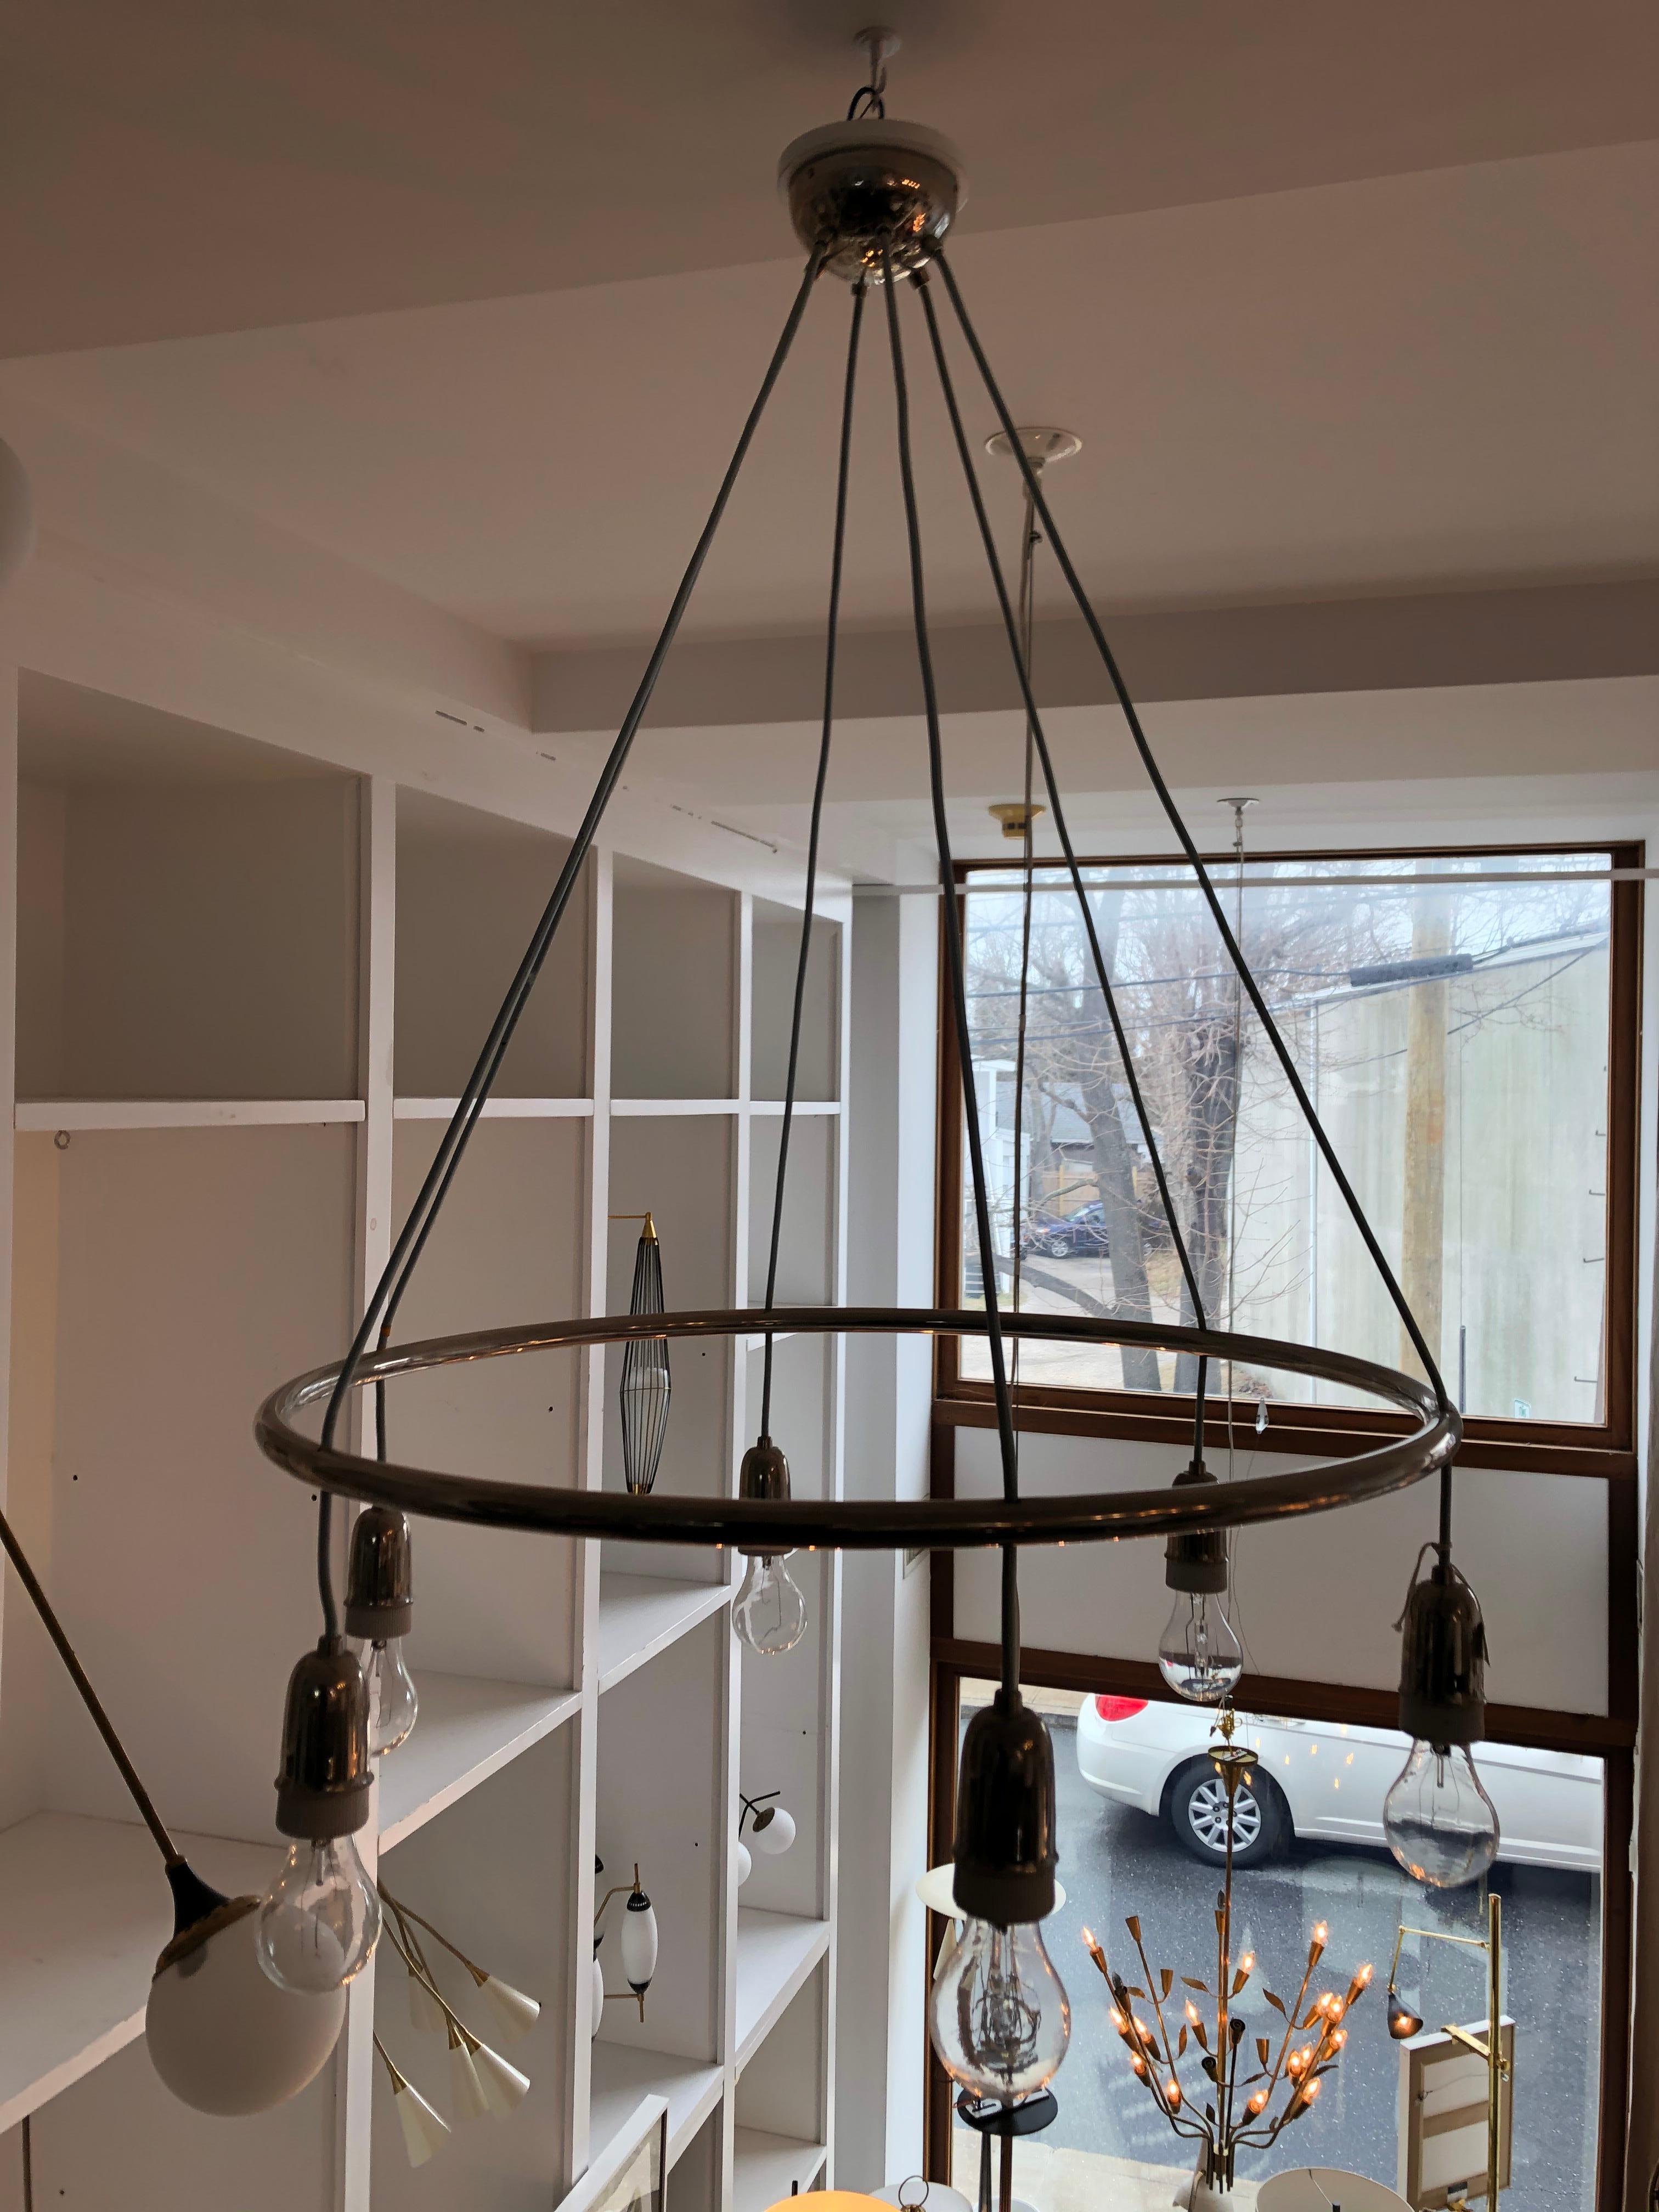 This unusual chandelier is suspended from the chrome canopy with six lines to a circular chrome tubular element from which the exposed filament bulbs are hung. Overall height is 41/42